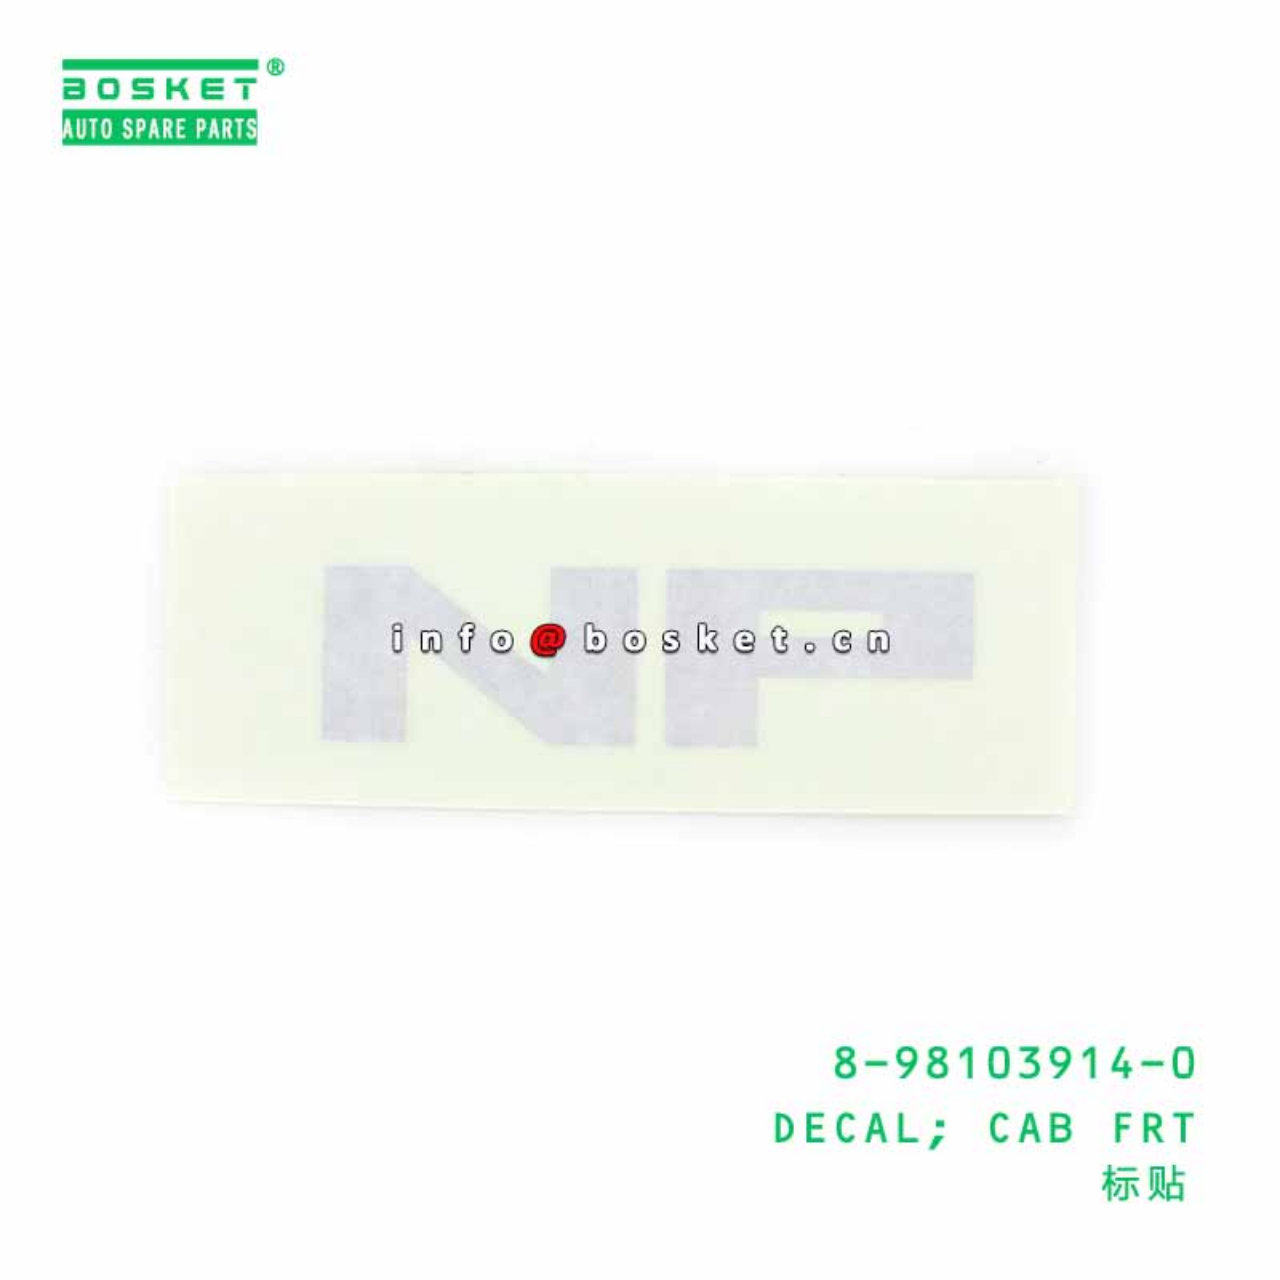 8-98103914-0 8981039140 CAB FRONT DECAL Suitable For ISUZU NQR NPR